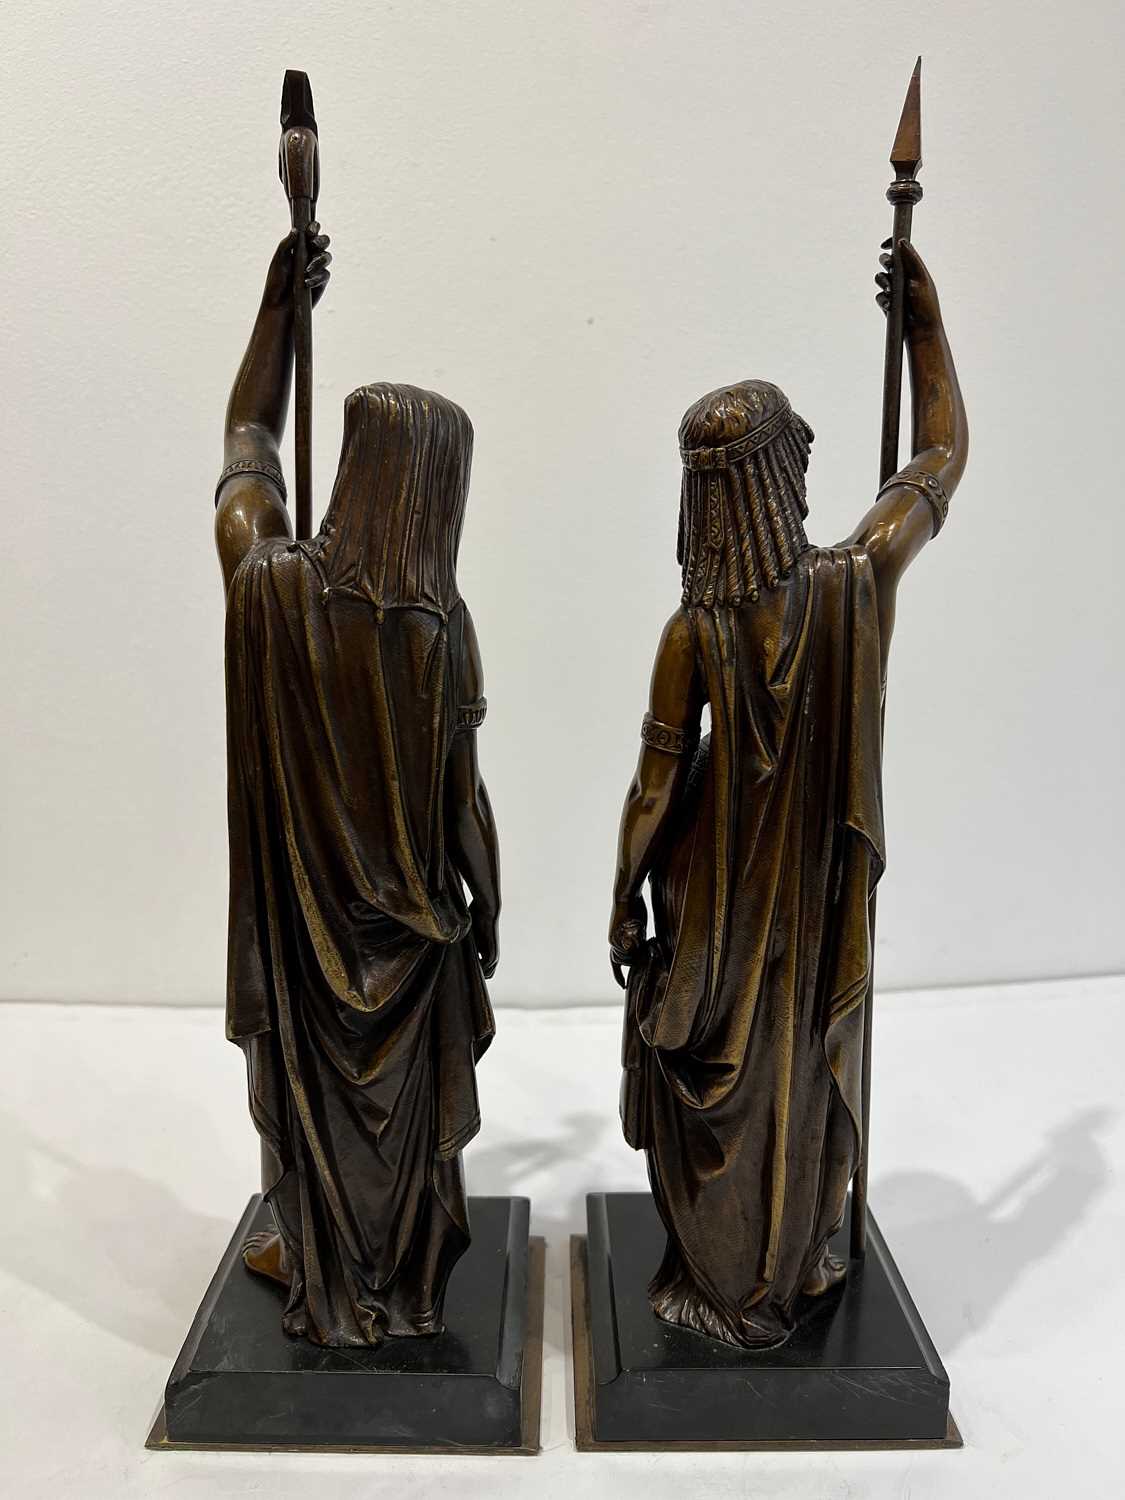 EMILE LOUIS PICAULT (FRENCH (1833-1915): A PAIR OF BRONZE FIGURES OF THE PRIEST AND PRIESTESS - Image 8 of 10